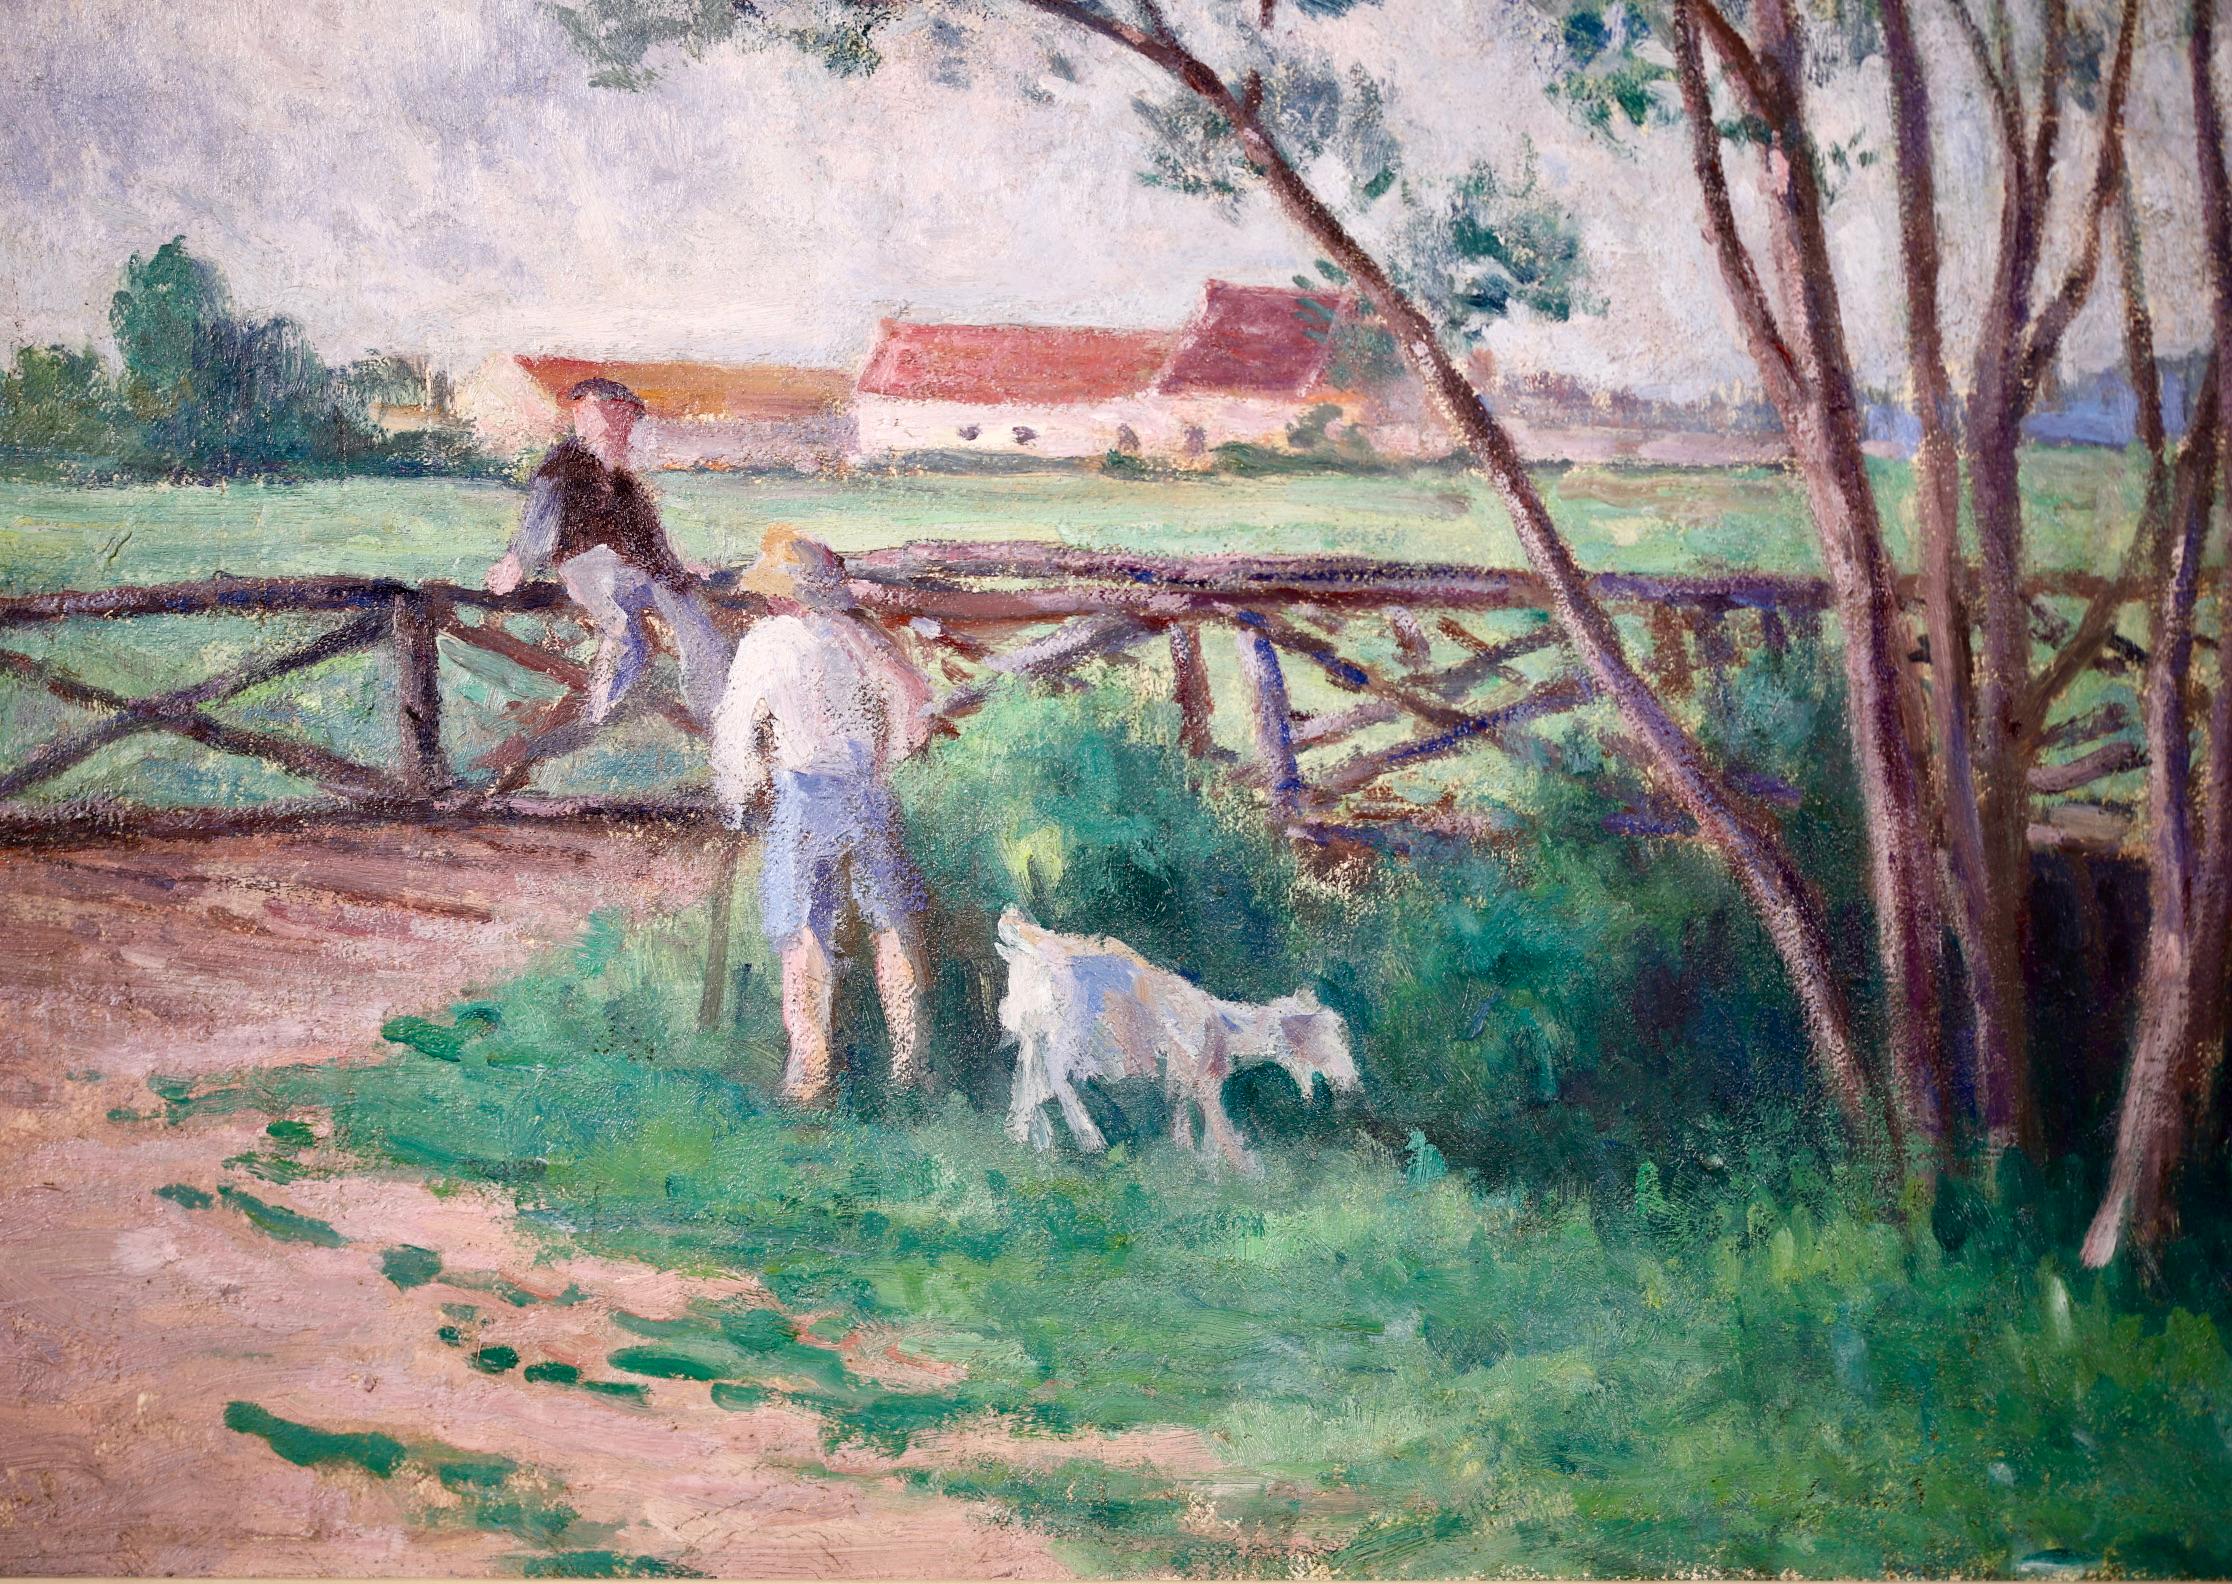 Guernes-19th Century Oil, Figures & Dog by River in Landscape by Maximilien Luce 3